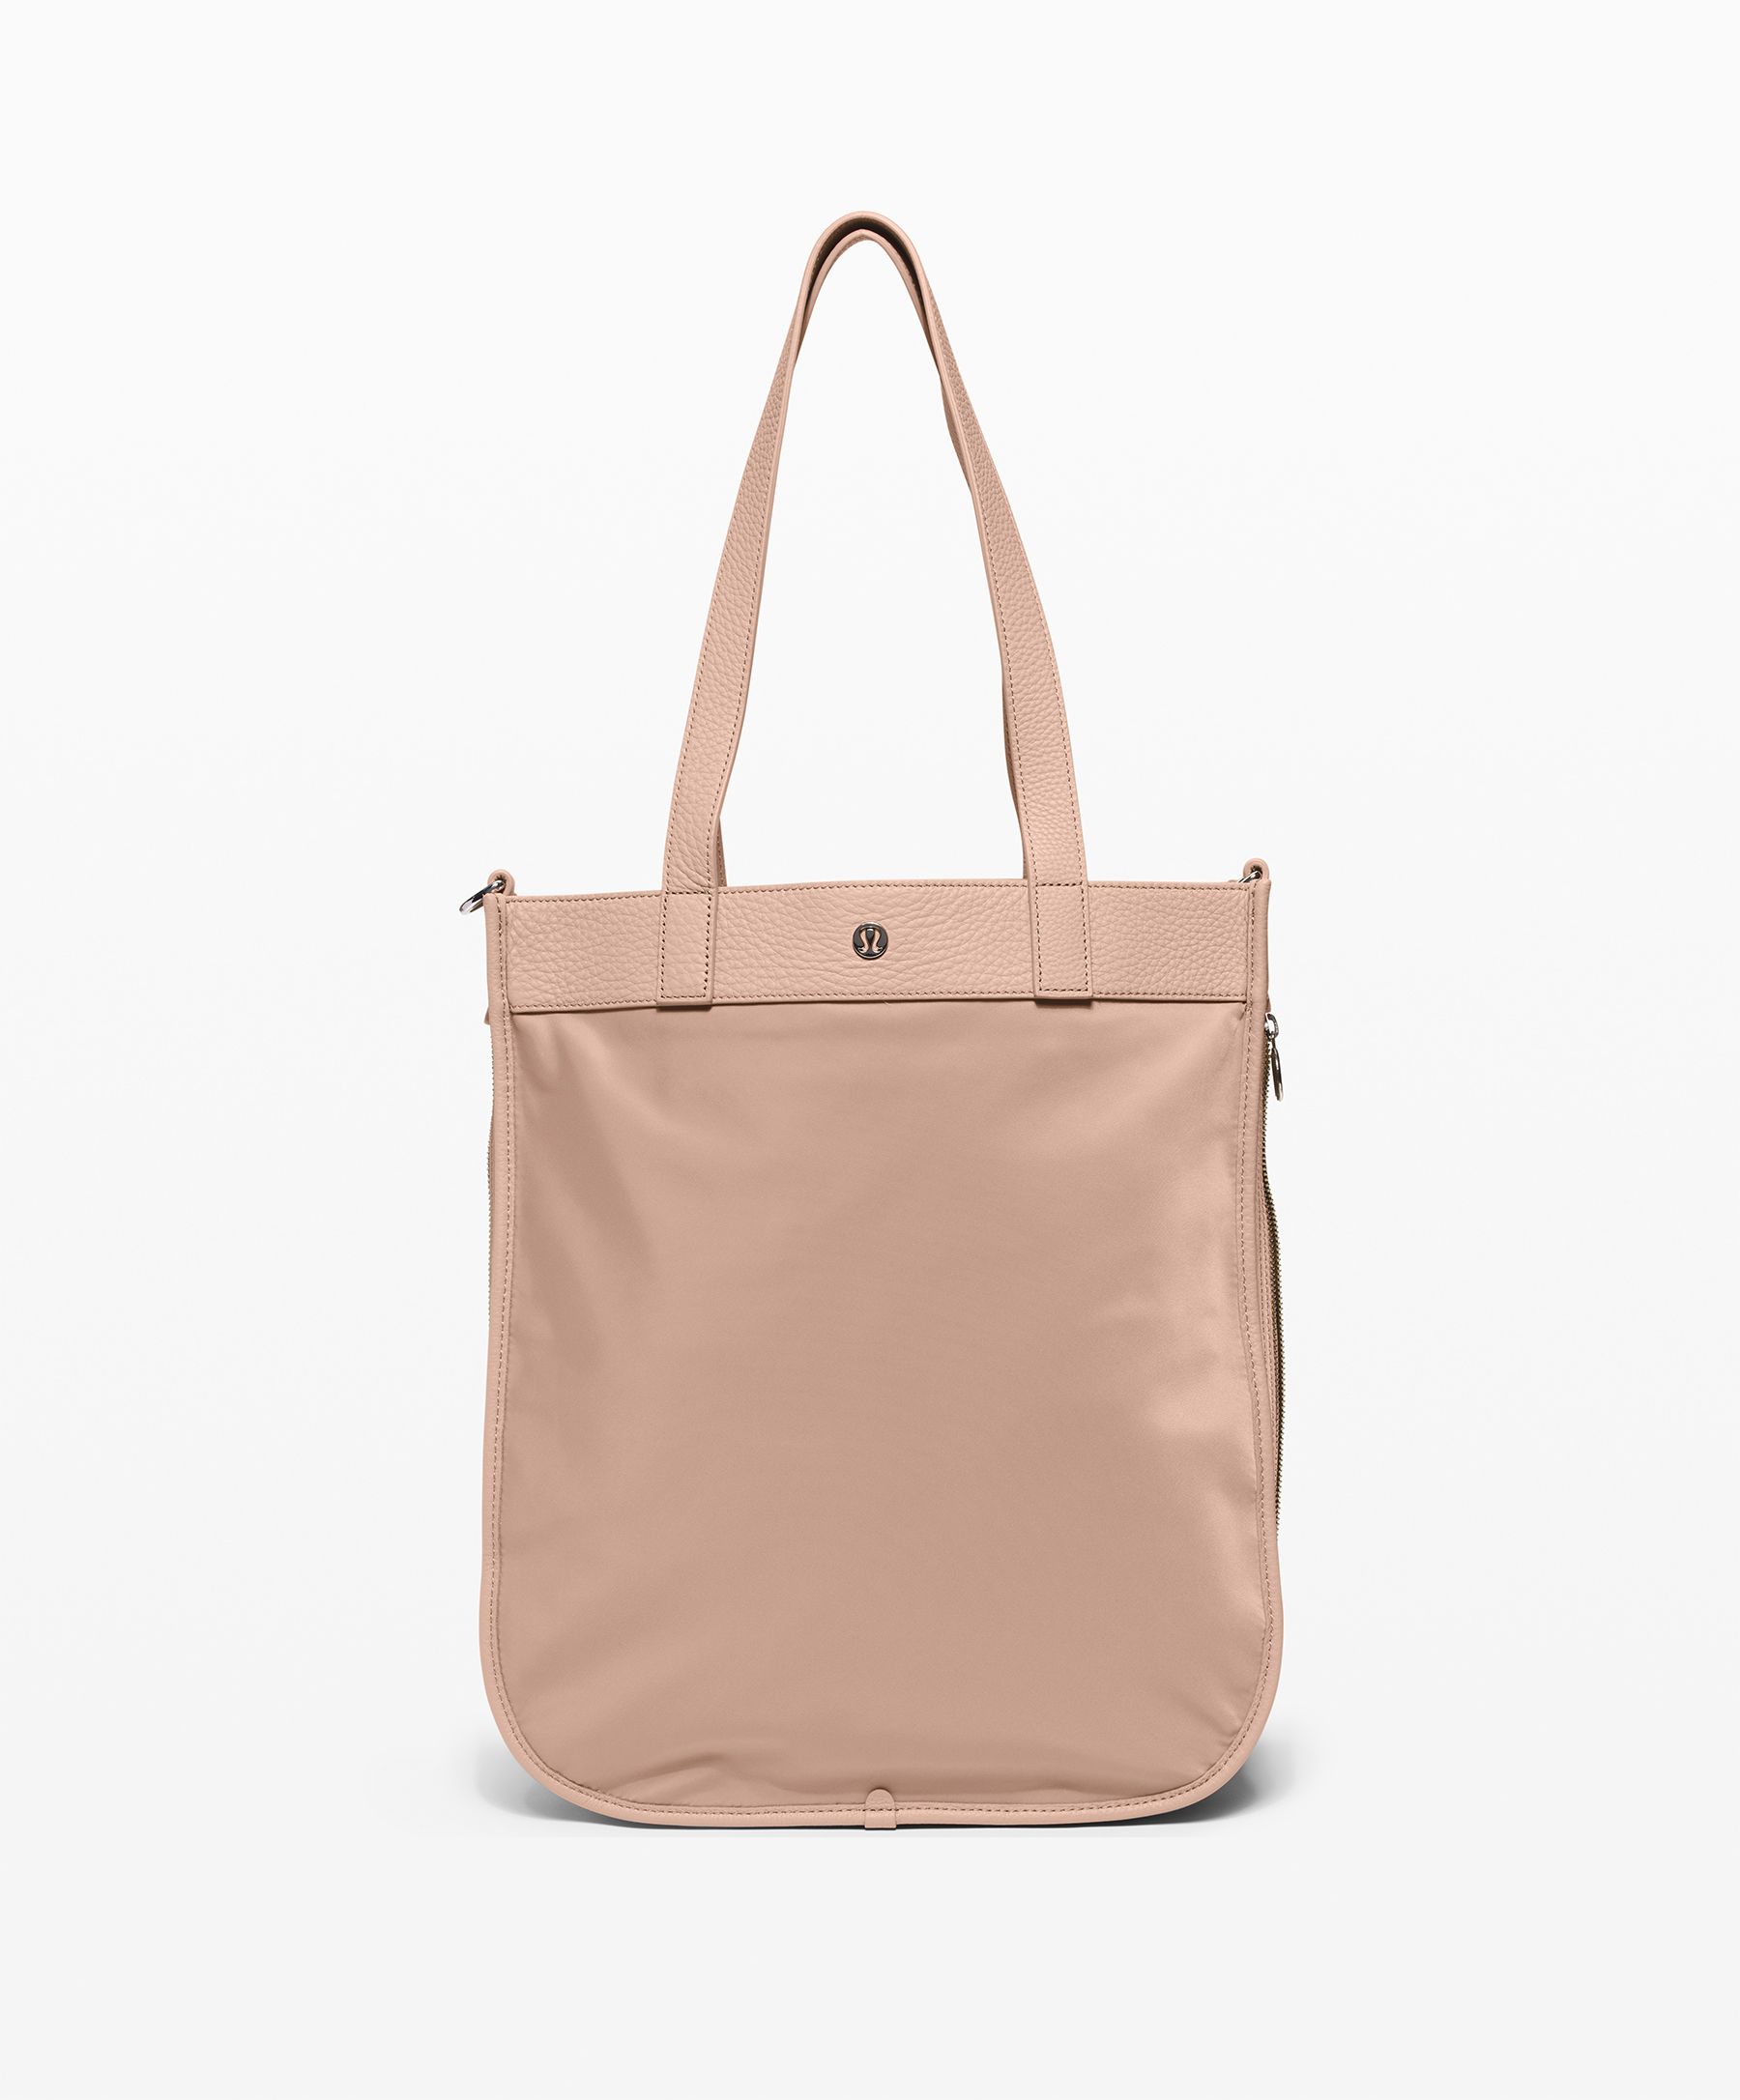 Lululemon Now And Always Tote *15l In Soft Sand/misty Shell